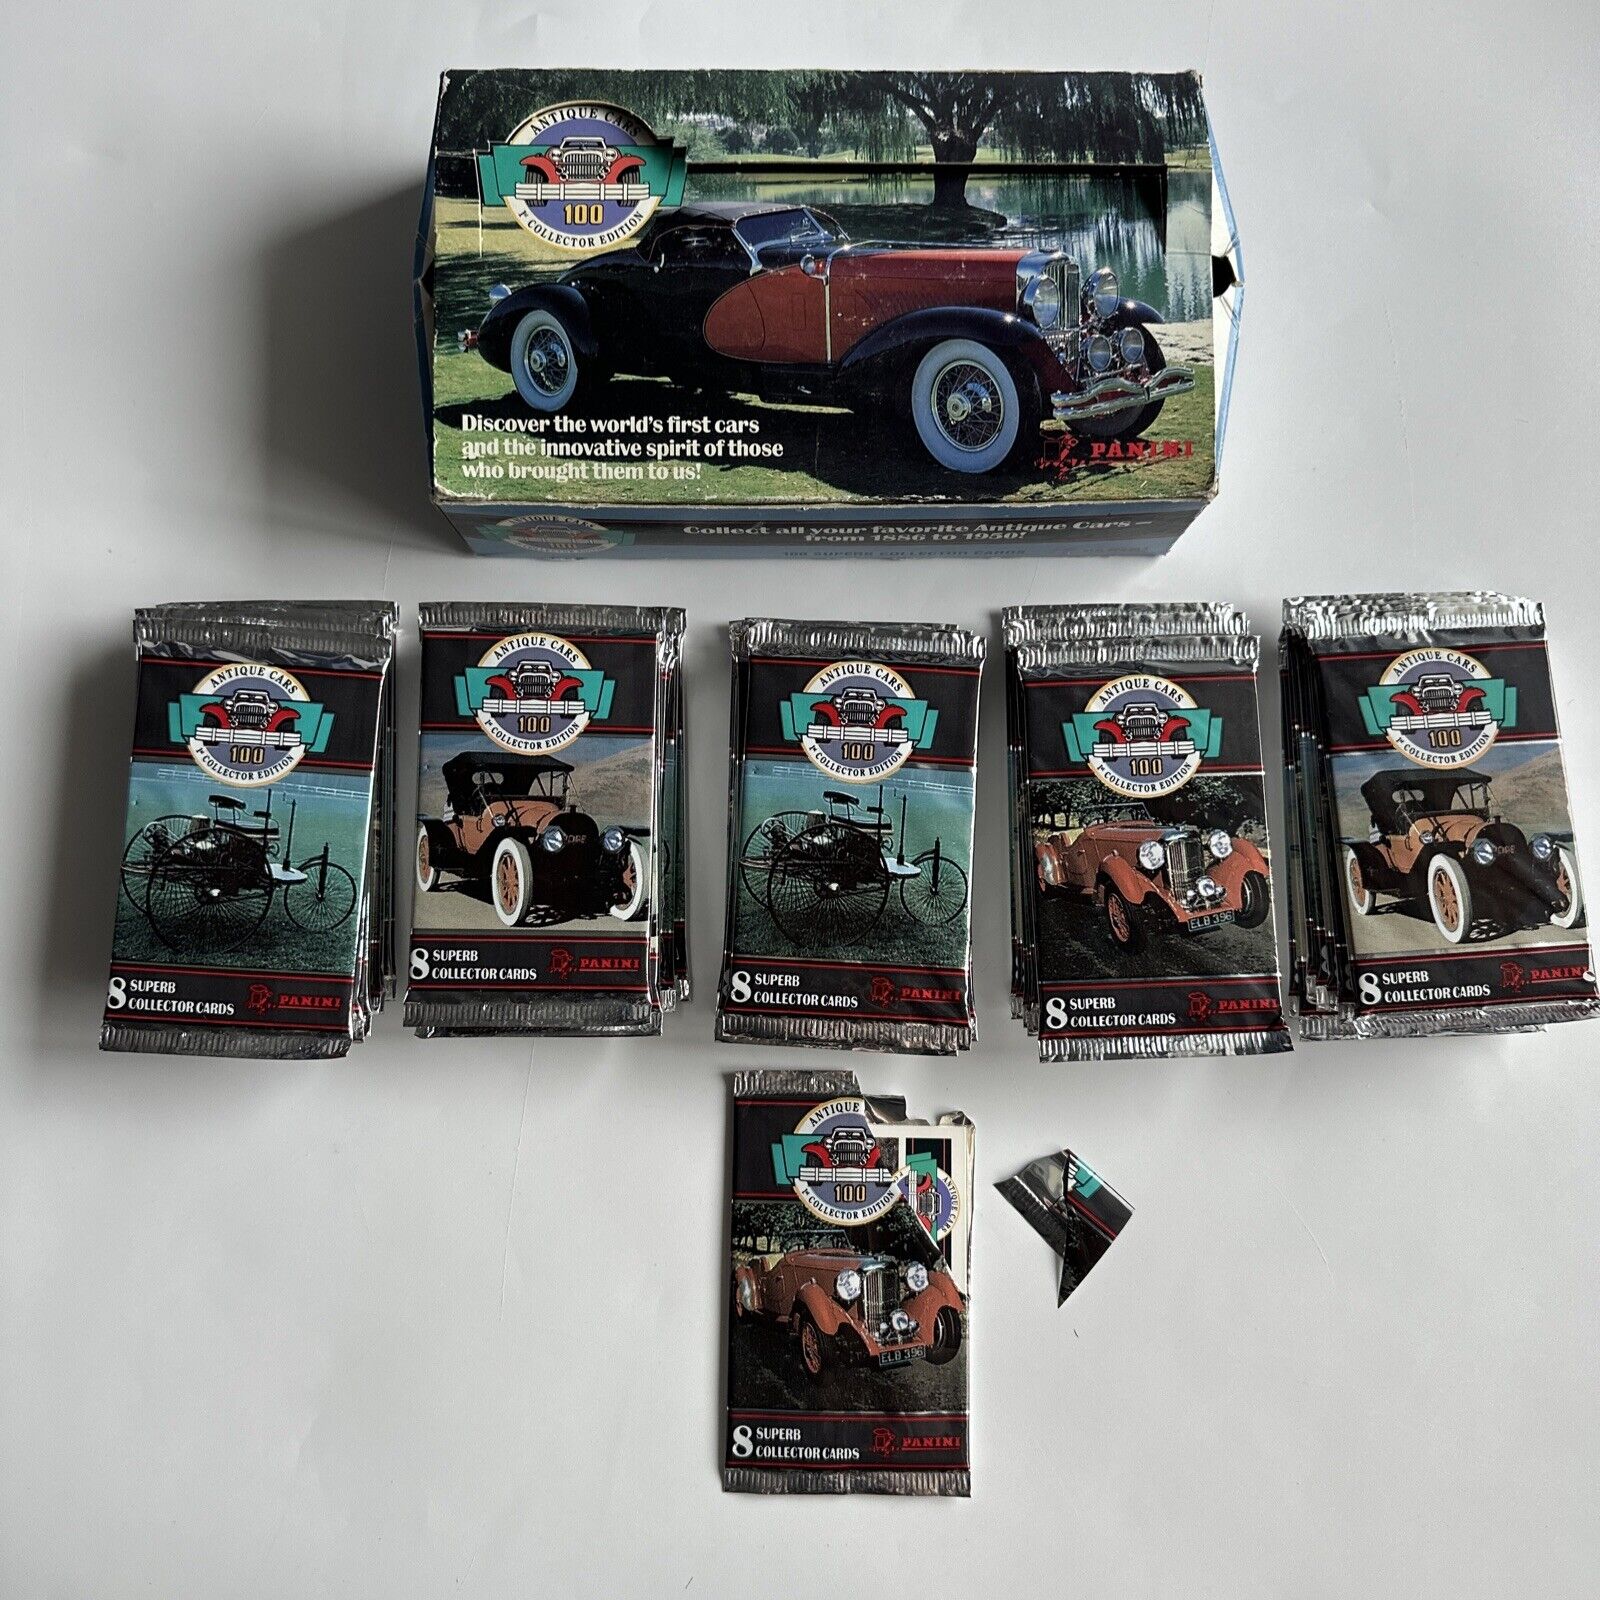 1991 Panini Antique Cars Collector Edition Cards Lot Of 35 Unopen Packs 1 Opened